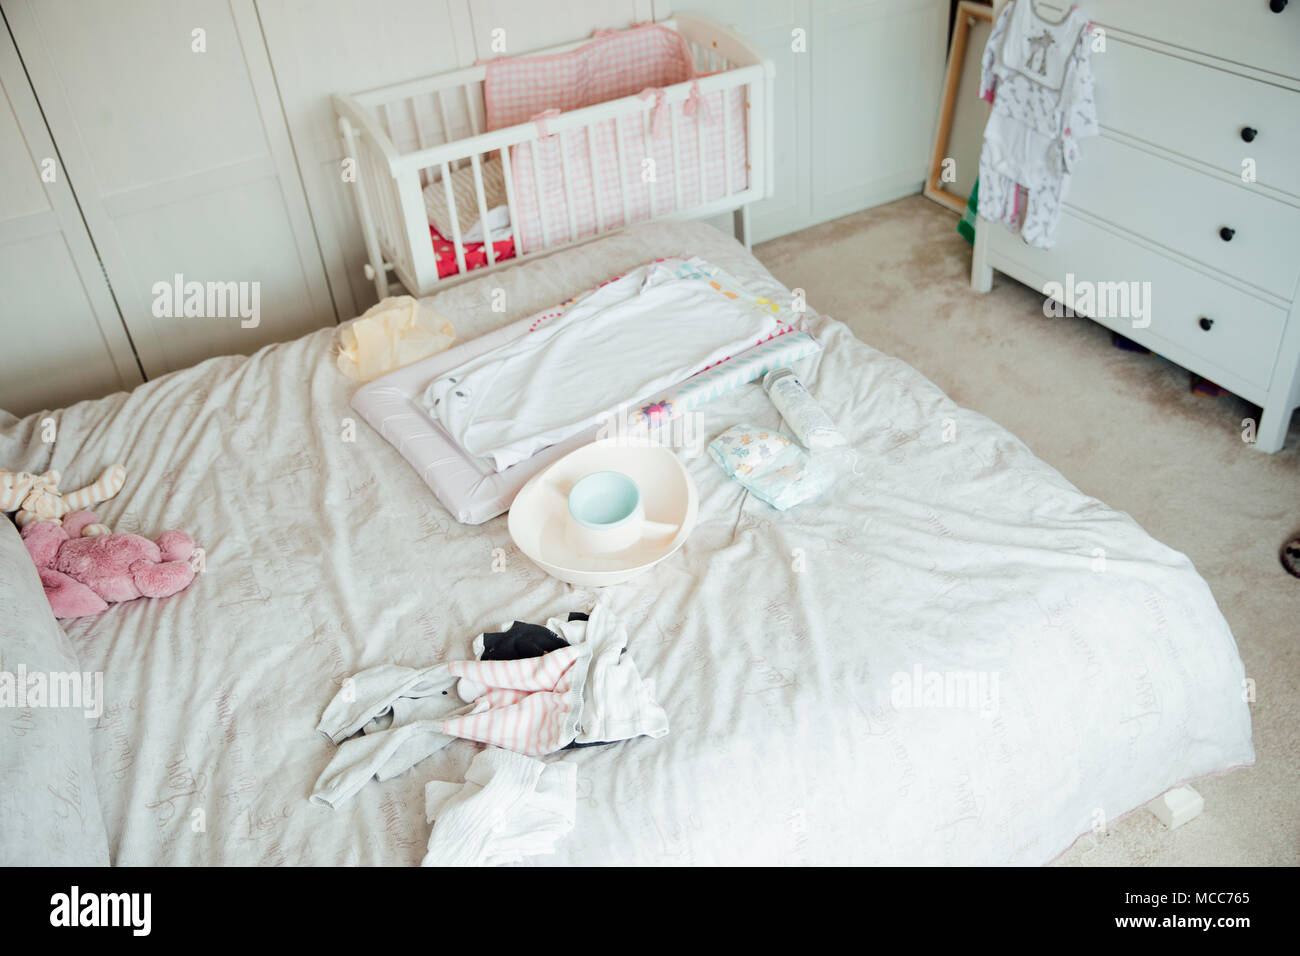 A mother's bedroom is filled with baby equipment. There is a changing mat and clothes sprawled over the bed. Stock Photo